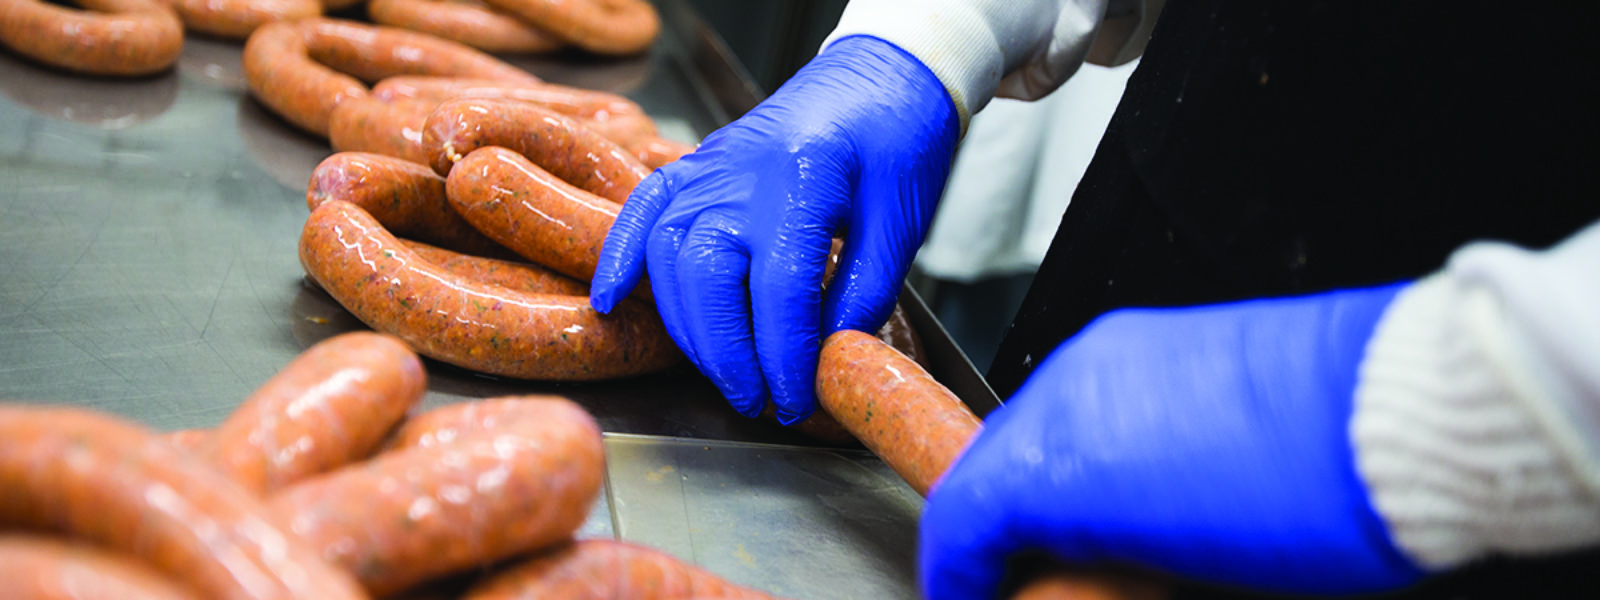 A person's hands making sausage